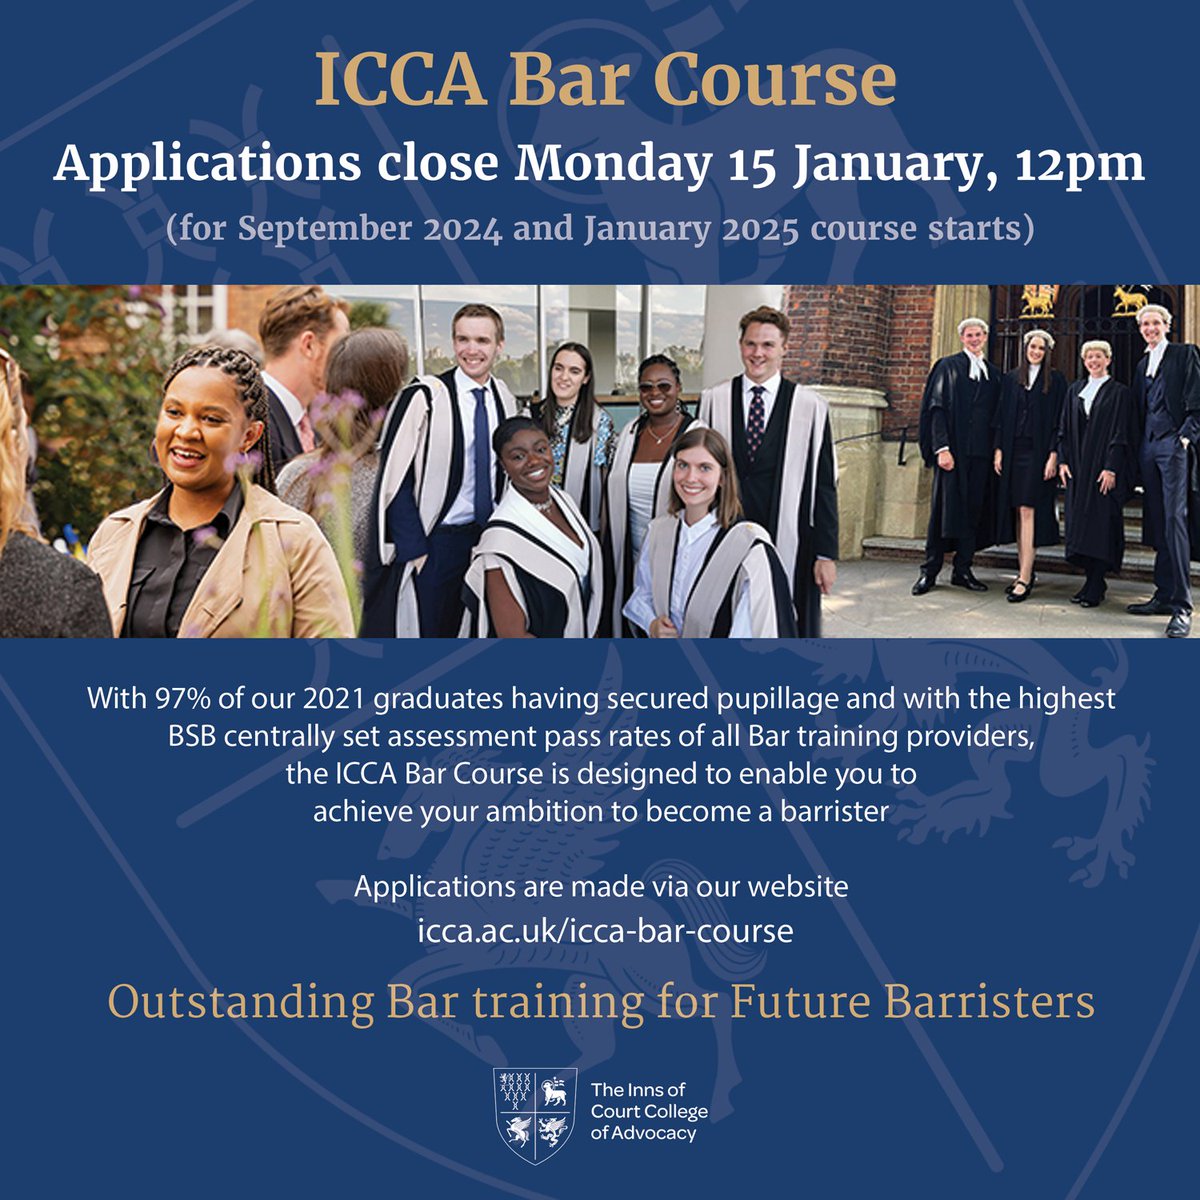 A reminder to ICCA Bar Course candidates! ICCA Bar Course applications close at 12pm on Monday 15 January 2024 (for courses commencing in September 2024 and January 2025). Apply here: ow.ly/Nj9Y50QoHLw #ForFutureBarristers #students #lawstudents #pupillage #barrister